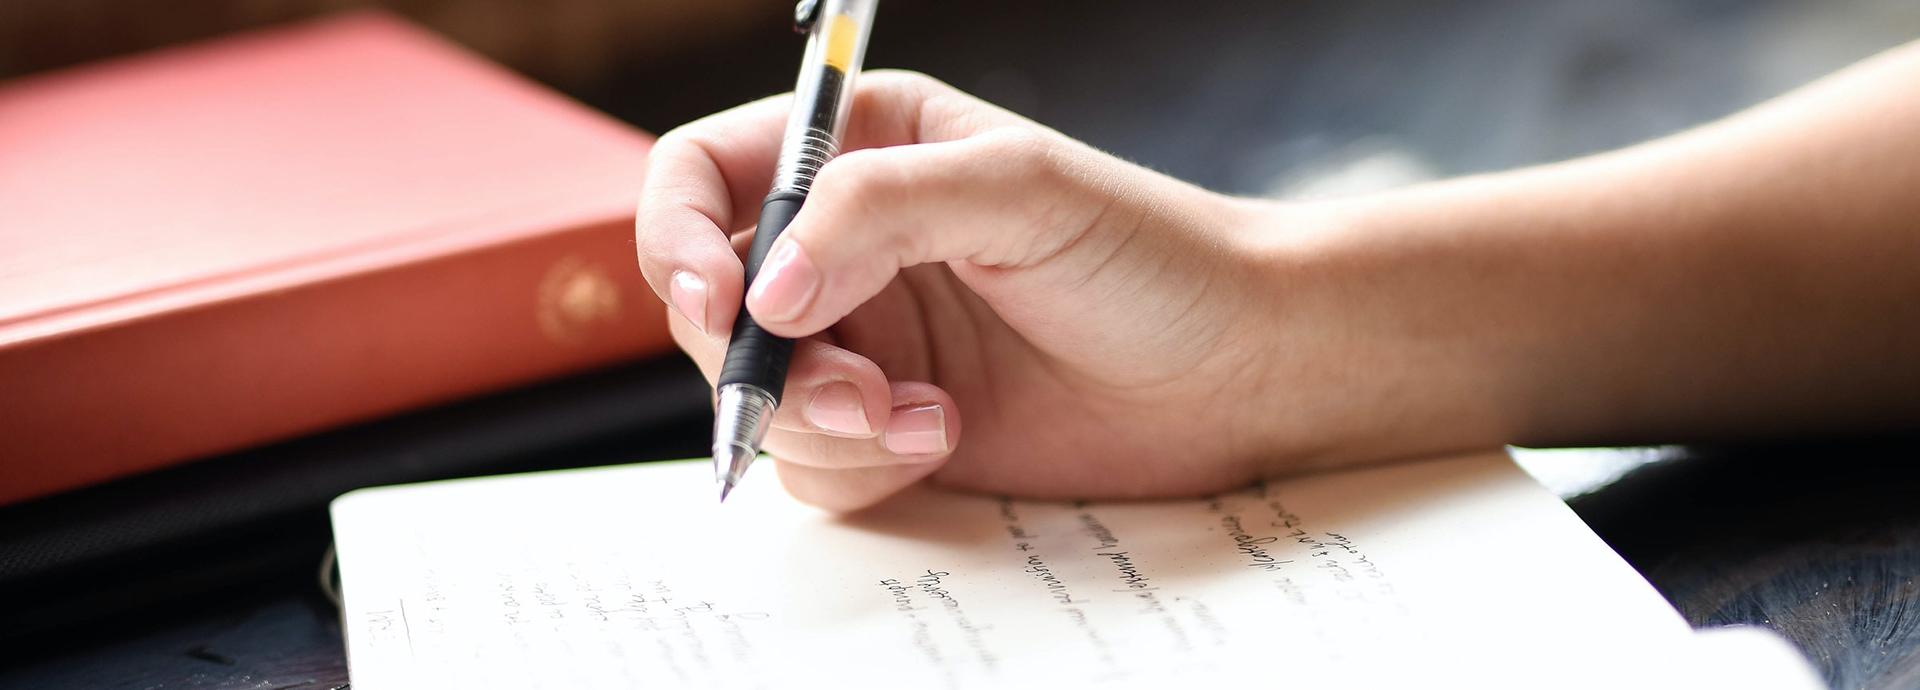 A hand holding a pen over an open notebook on a table